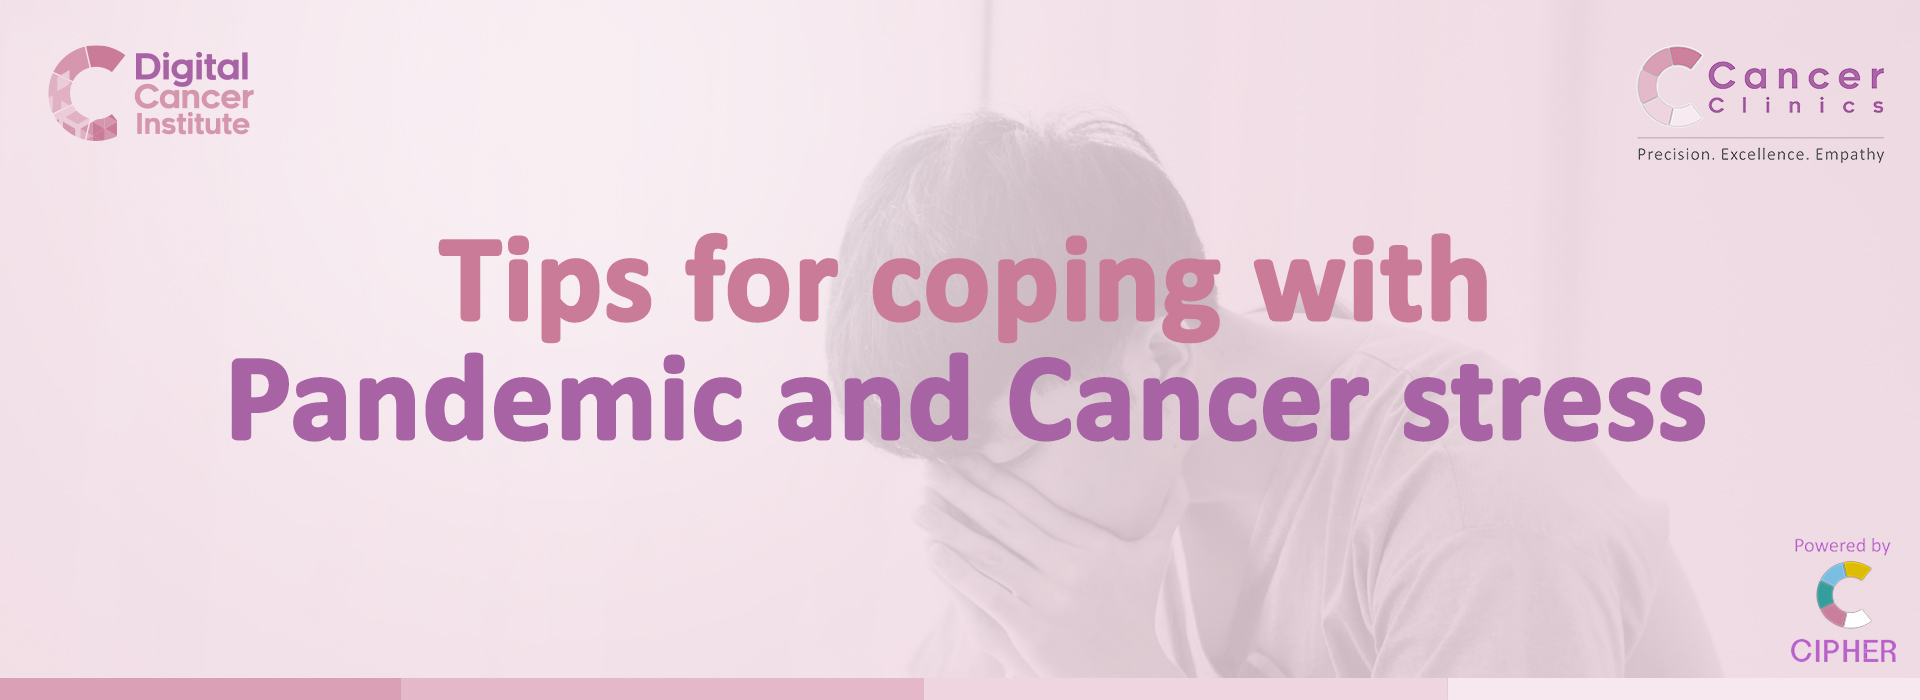  Tips for coping with Pandemic and Cancer stress